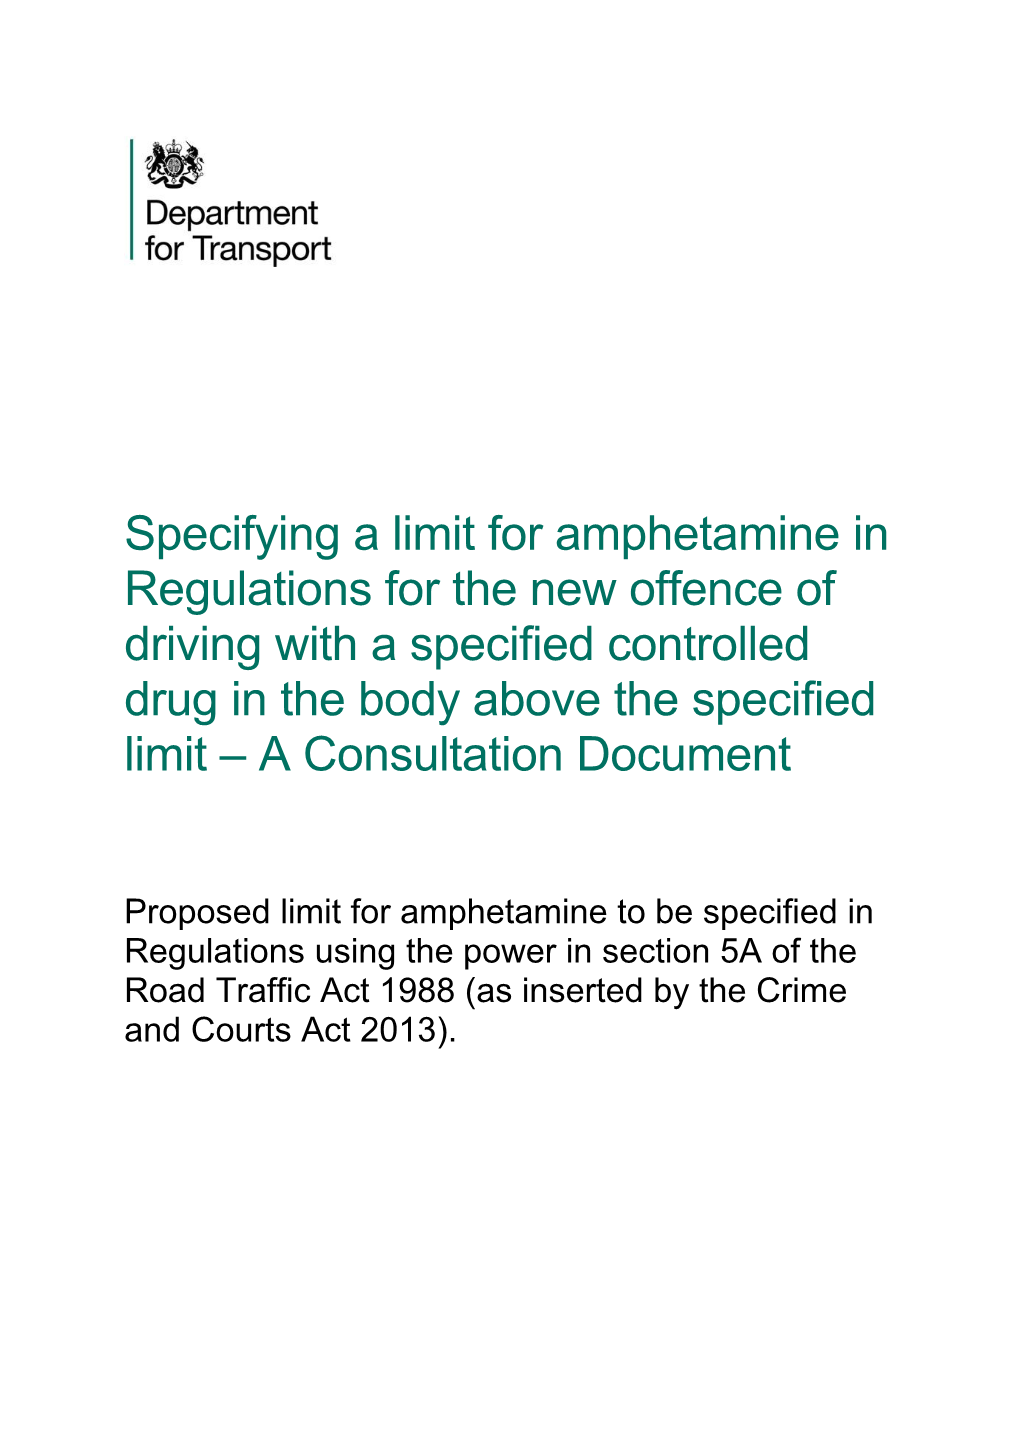 Specifying a Limit for Amphetamine in Regulations for the New Offence of Driving with A